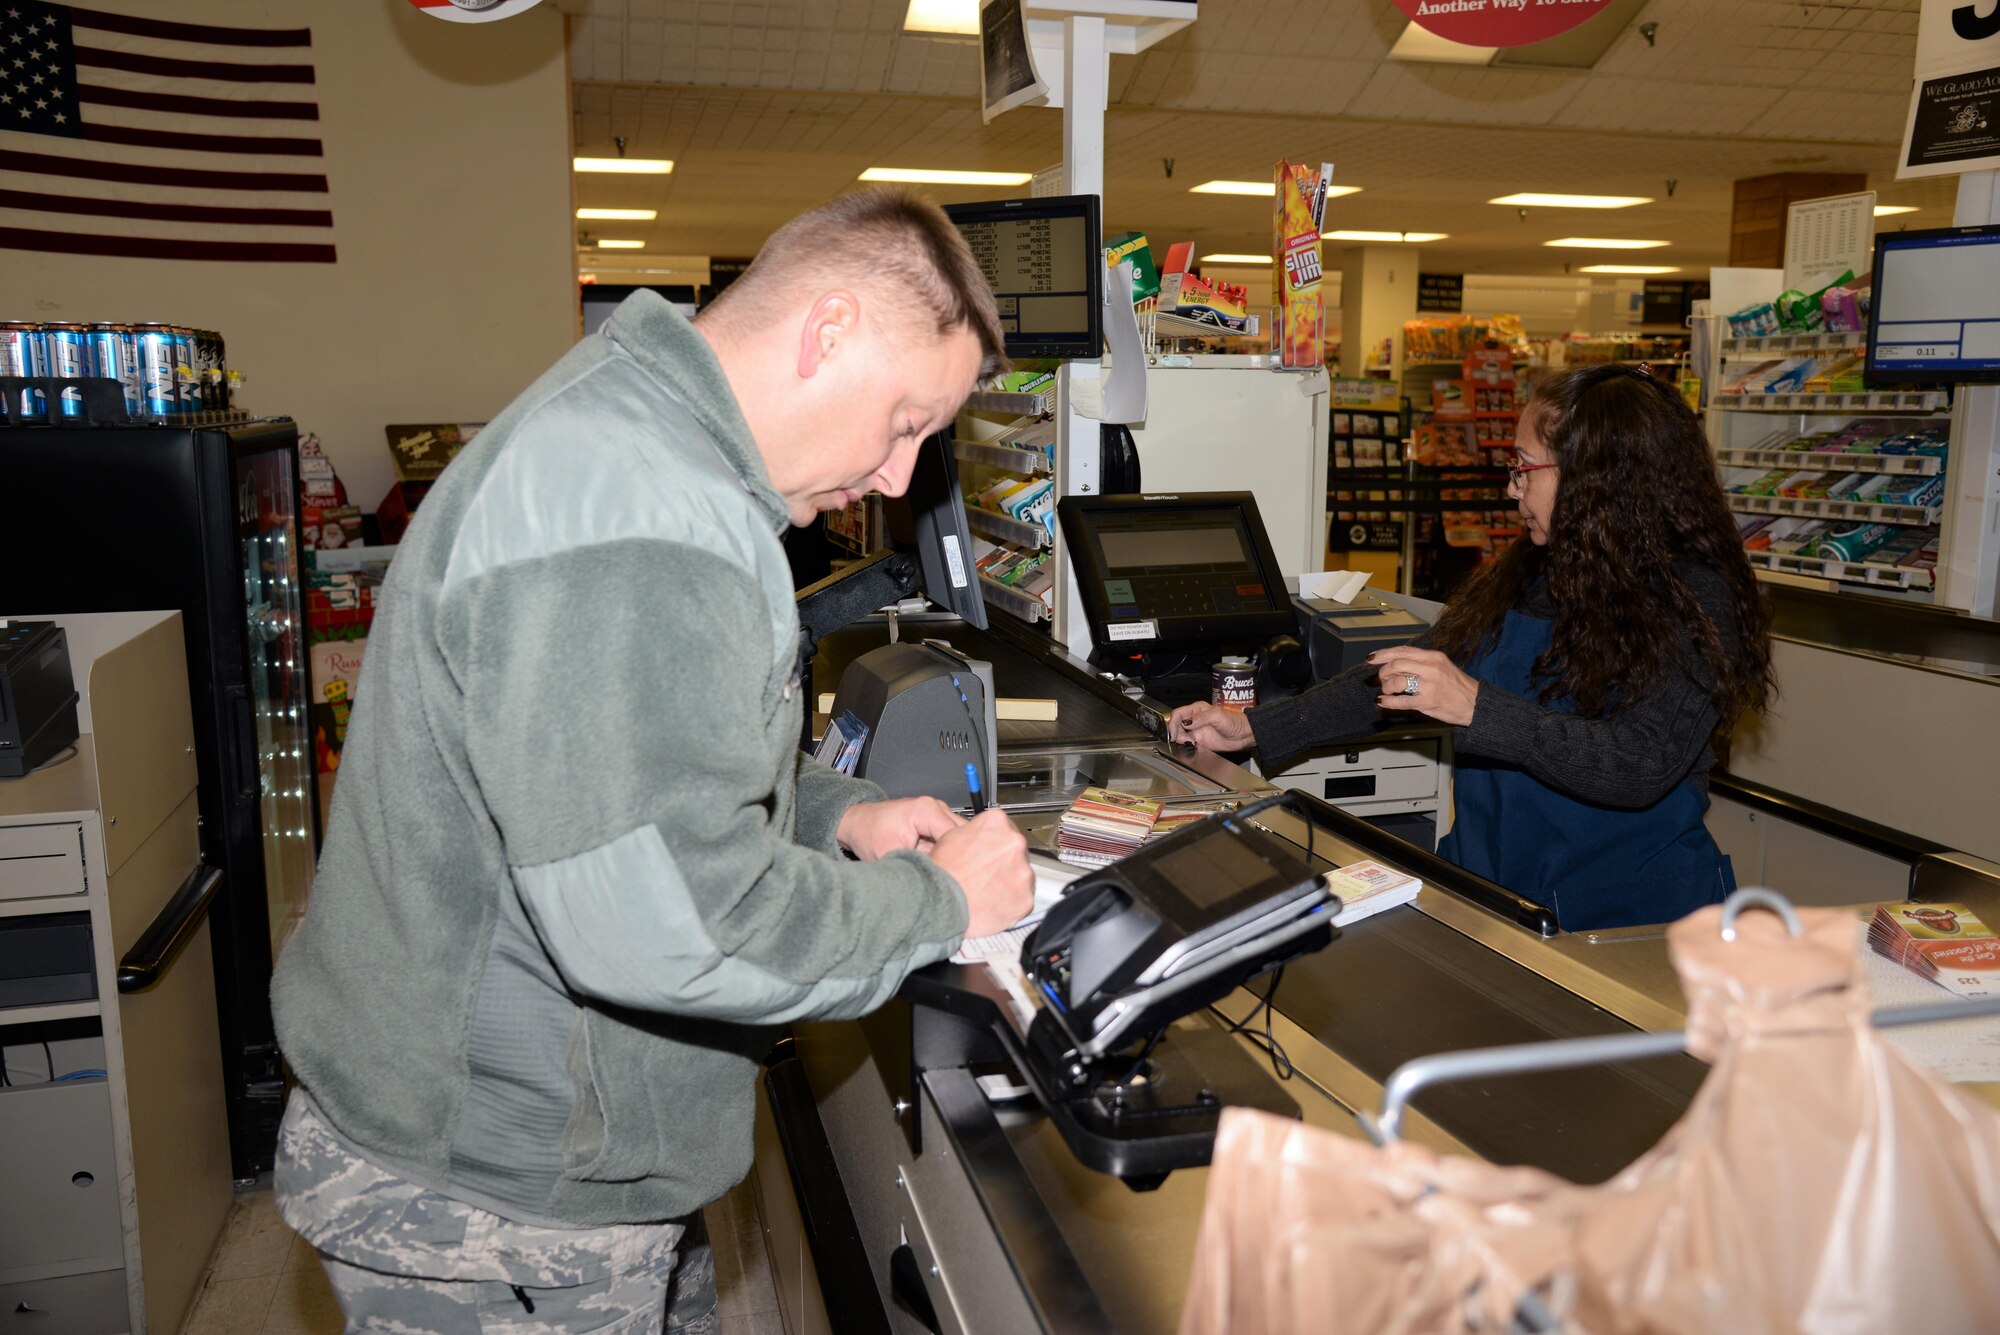 Master Sgt. Brandon Finefrock, 90th Missile Security Forces Squadron first sergeant, purchases commissary food items to assemble 125 Thanksgiving baskets at F.E. Warren Air Force Base, Wyo., Nov. 18, 2016.  Also known as OPERATION WARMHEART to the public, many of the funds are provided through community members and the Combined Federal Campaign charity (code 19015). The baskets will be delivered to junior-ranking Airmen, selected by their chain of command, to ensure their families are able to enjoy a Thanksgiving meal for the holiday. (U.S. Photo by 2d Lt. Nikita Thorpe)